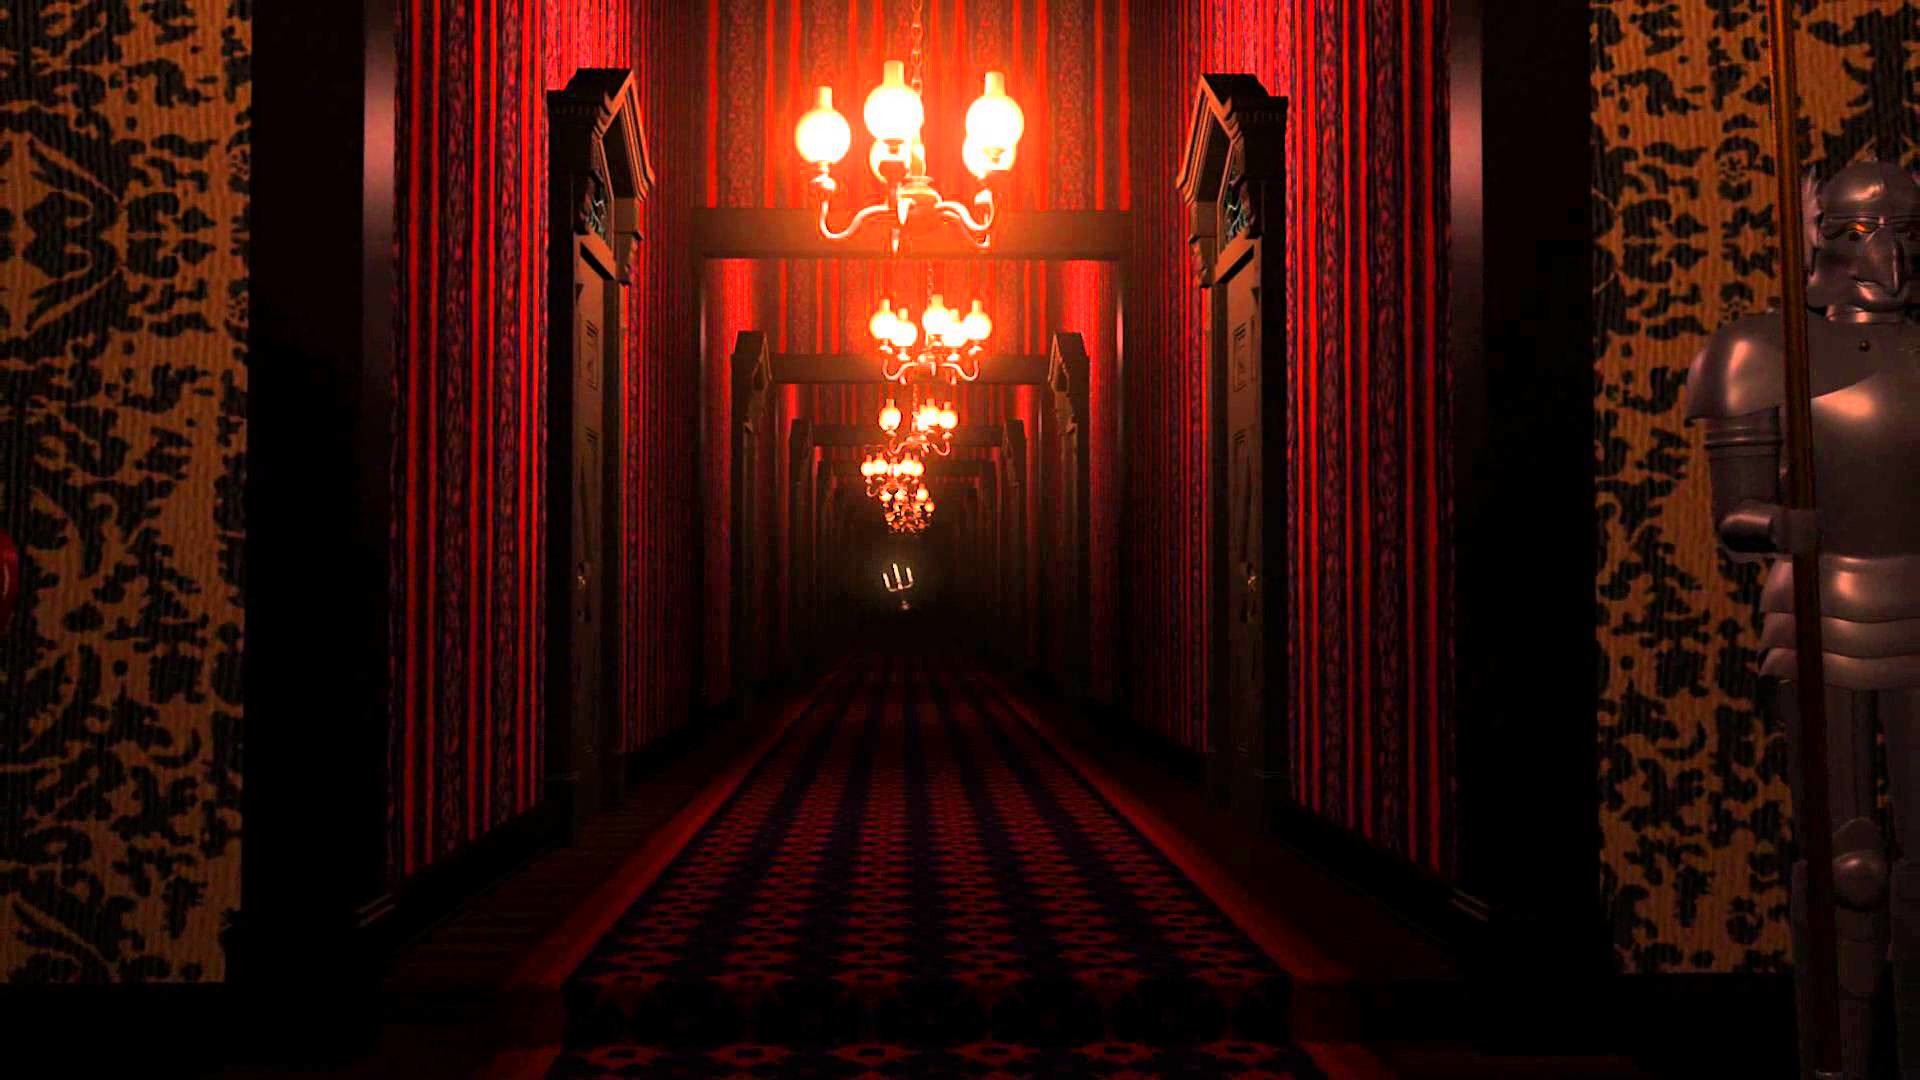 A short preview of the Endless Hallway sequence from my Digital recreation of the Haunted Mansion